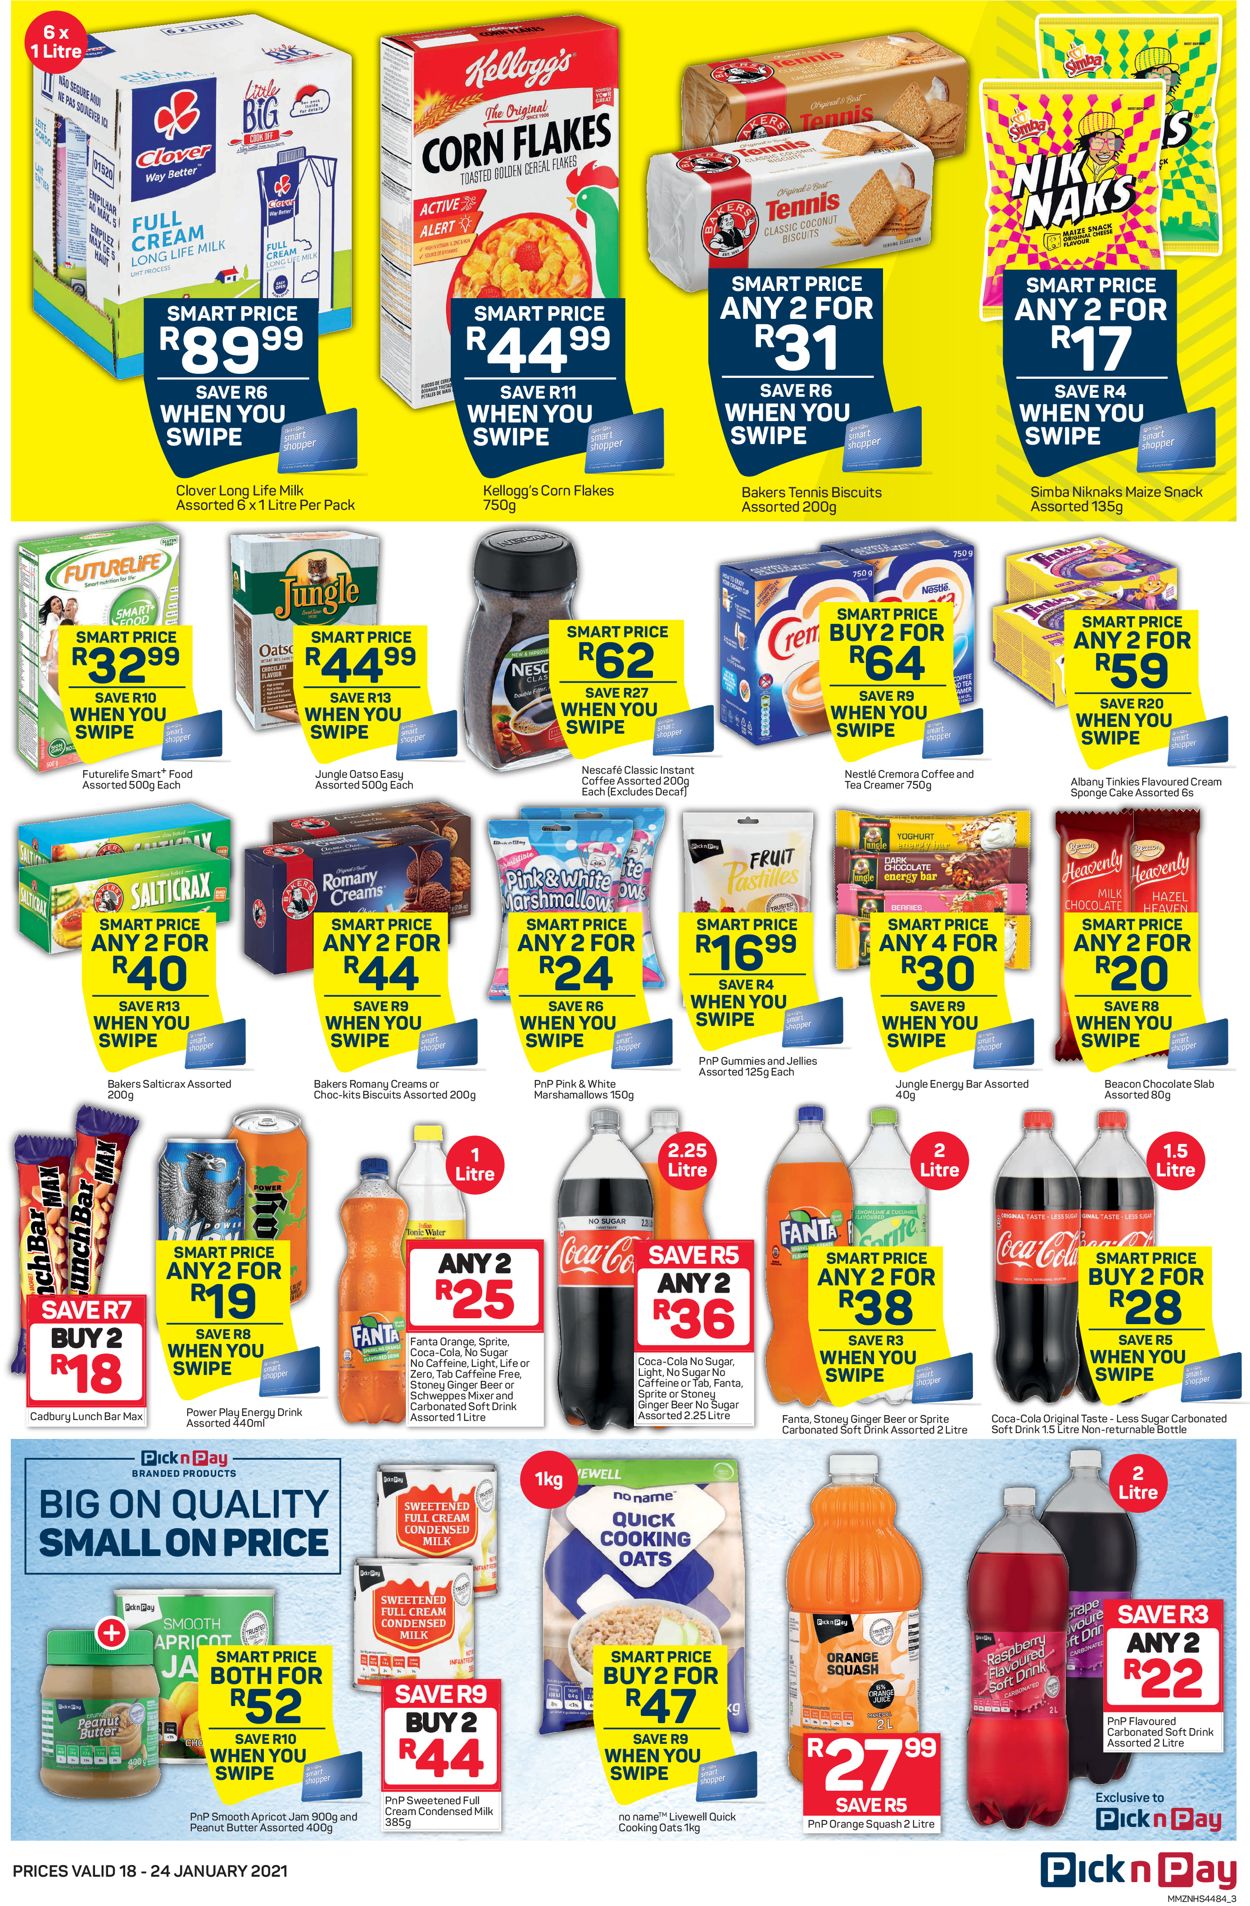 Pick n Pay Smart Price 2021 Catalogue - 2021/01/18-2021/01/24 (Page 3)